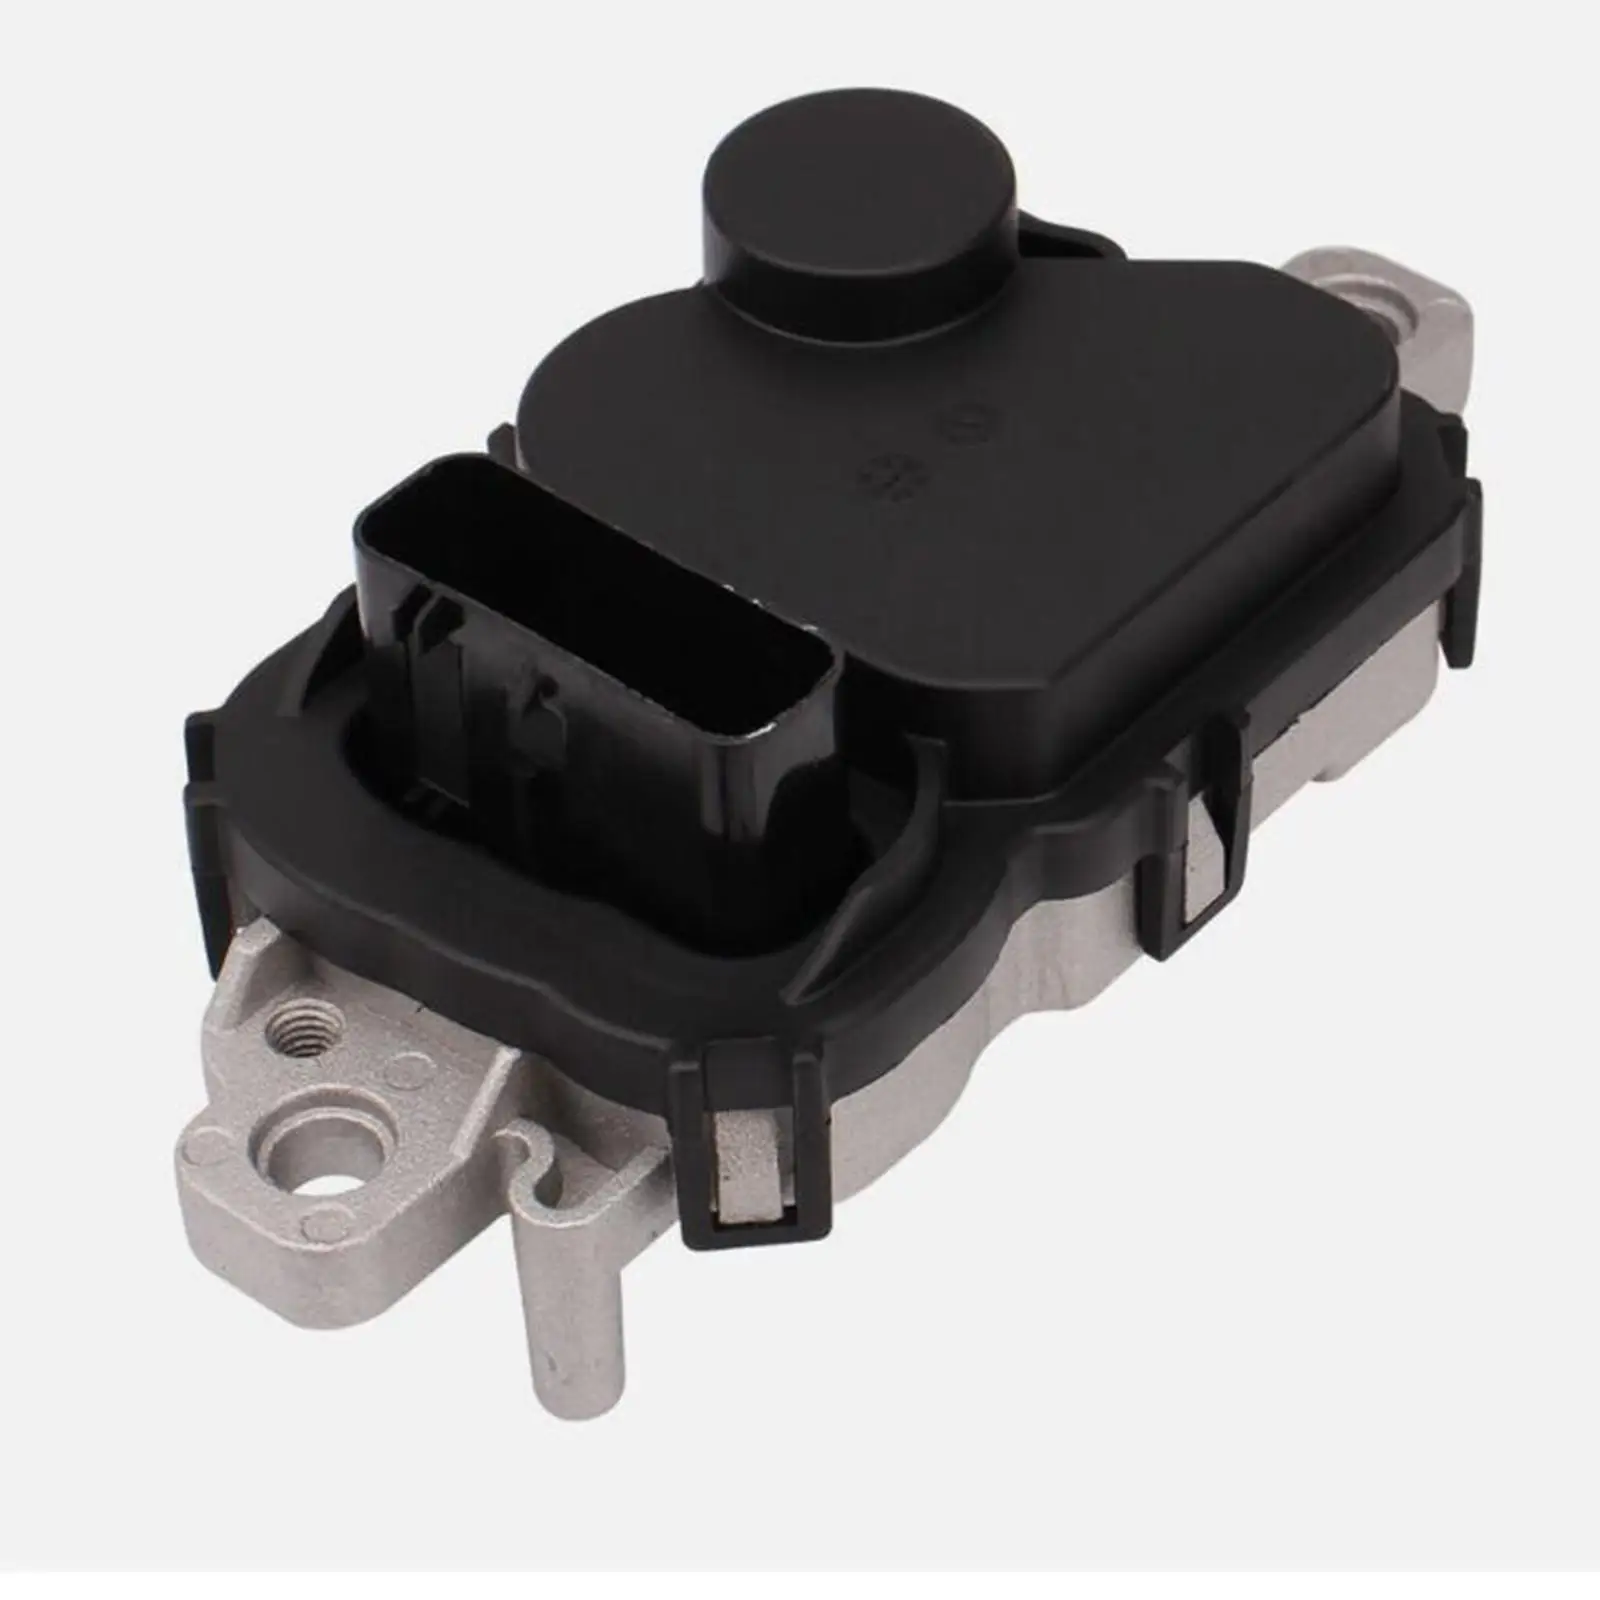 Fuel Pump Driver Module for Durable Vehicle Repair Parts Easily Install